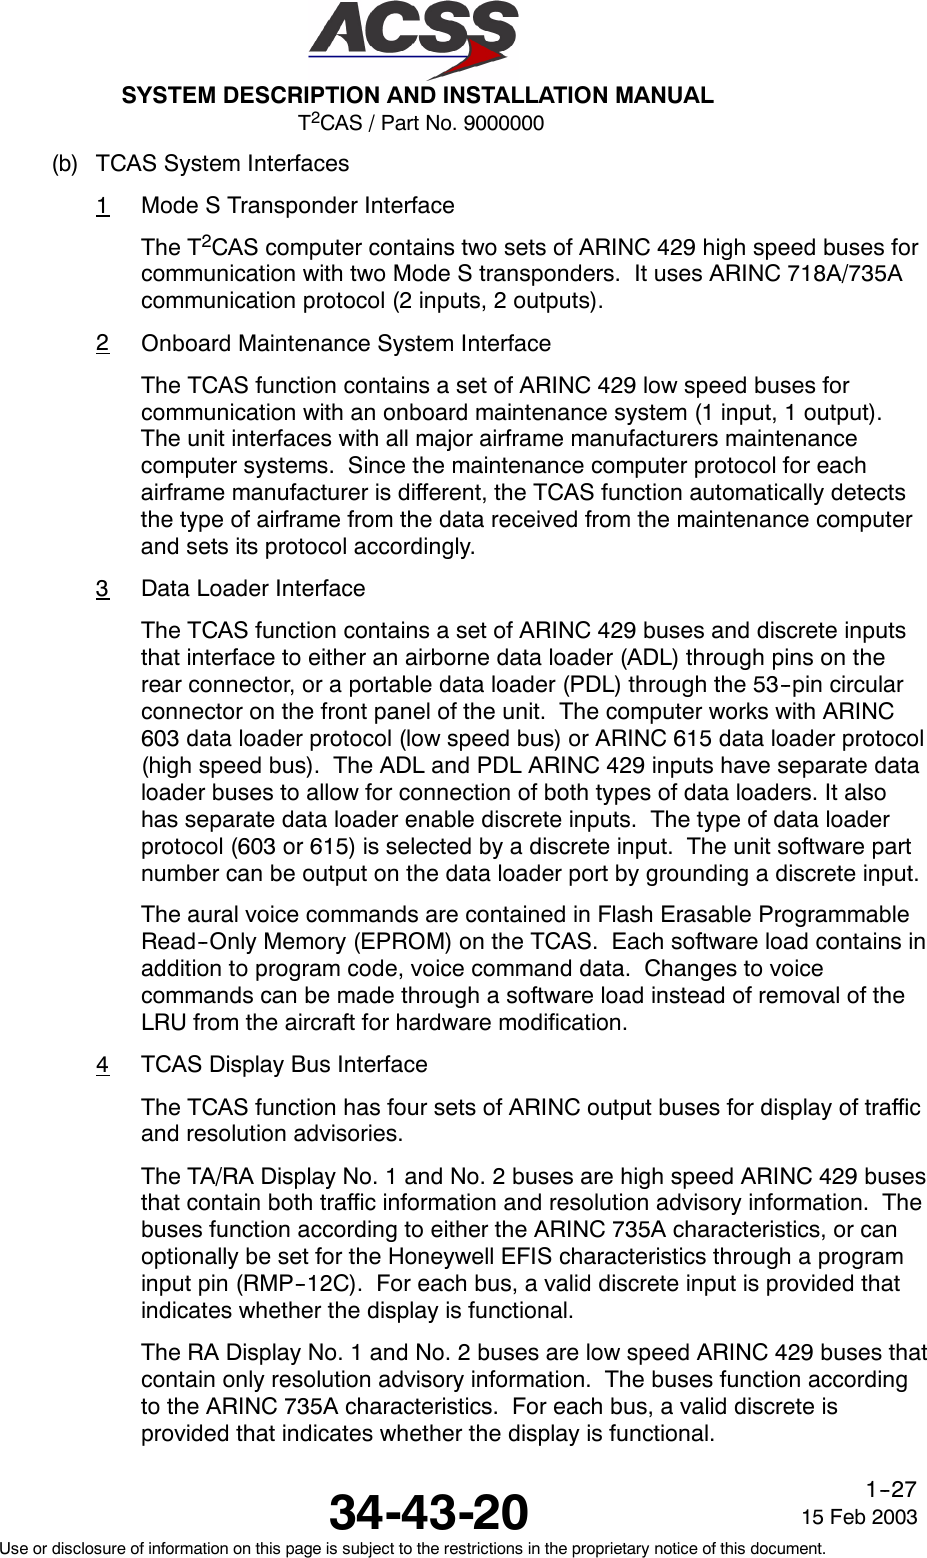 T2CAS / Part No. 9000000SYSTEM DESCRIPTION AND INSTALLATION MANUAL34-43-20 15 Feb 2003Use or disclosure of information on this page is subject to the restrictions in the proprietary notice of this document.1--27(b) TCAS System Interfaces1Mode S Transponder InterfaceThe T2CAS computer contains two sets of ARINC 429 high speed buses forcommunication with two Mode S transponders. It uses ARINC 718A/735Acommunication protocol (2 inputs, 2 outputs).2Onboard Maintenance System InterfaceThe TCAS function contains a set of ARINC 429 low speed buses forcommunication with an onboard maintenance system (1 input, 1 output).The unit interfaces with all major airframe manufacturers maintenancecomputer systems. Since the maintenance computer protocol for eachairframe manufacturer is different, the TCAS function automatically detectsthe type of airframe from the data received from the maintenance computerand sets its protocol accordingly.3Data Loader InterfaceThe TCAS function contains a set of ARINC 429 buses and discrete inputsthat interface to either an airborne data loader (ADL) through pins on therear connector, or a portable data loader (PDL) through the 53--pin circularconnector on the front panel of the unit. The computer works with ARINC603 data loader protocol (low speed bus) or ARINC 615 data loader protocol(high speed bus). The ADL and PDL ARINC 429 inputs have separate dataloader buses to allow for connection of both types of data loaders. It alsohas separate data loader enable discrete inputs. The type of data loaderprotocol (603 or 615) is selected by a discrete input. The unit software partnumber can be output on the data loader port by grounding a discrete input.The aural voice commands are contained in Flash Erasable ProgrammableRead--Only Memory (EPROM) on the TCAS. Each software load contains inaddition to program code, voice command data. Changes to voicecommands can be made through a software load instead of removal of theLRU from the aircraft for hardware modification.4TCAS Display Bus InterfaceThe TCAS function has four sets of ARINC output buses for display of trafficand resolution advisories.The TA/RA Display No. 1 and No. 2 buses are high speed ARINC 429 busesthat contain both traffic information and resolution advisory information. Thebuses function according to either the ARINC 735A characteristics, or canoptionally be set for the Honeywell EFIS characteristics through a programinput pin (RMP--12C). For each bus, a valid discrete input is provided thatindicates whether the display is functional.The RA Display No. 1 and No. 2 buses are low speed ARINC 429 buses thatcontain only resolution advisory information. The buses function accordingto the ARINC 735A characteristics. For each bus, a valid discrete isprovided that indicates whether the display is functional.